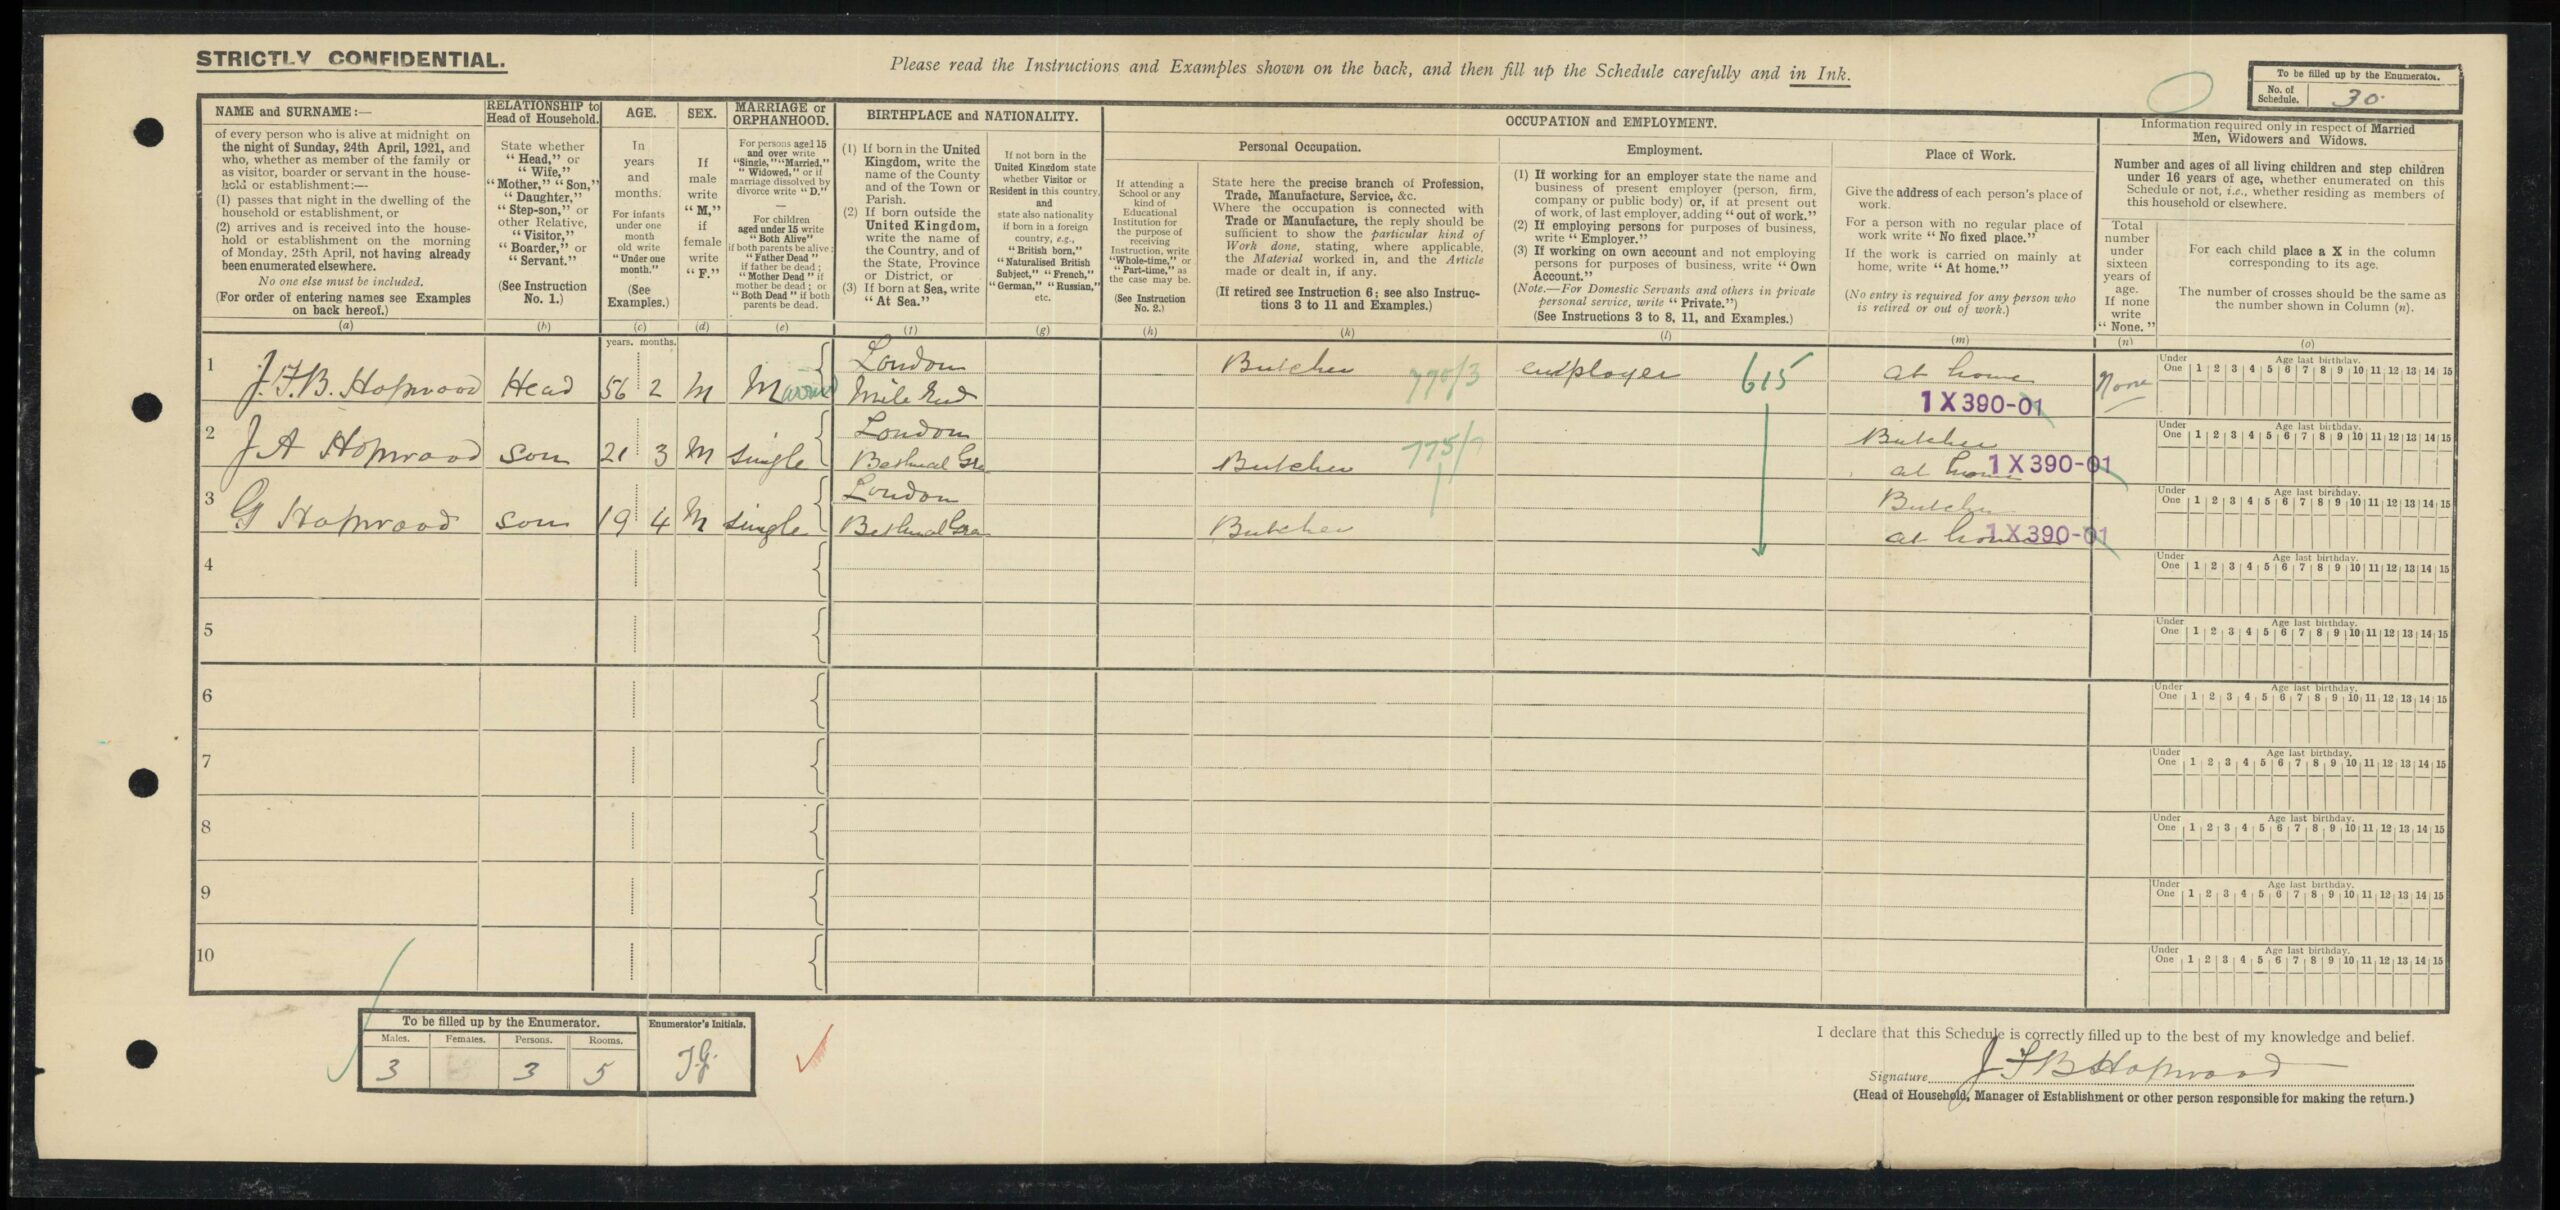 1921 Census record for 101 Grove Road Tower Hamlets